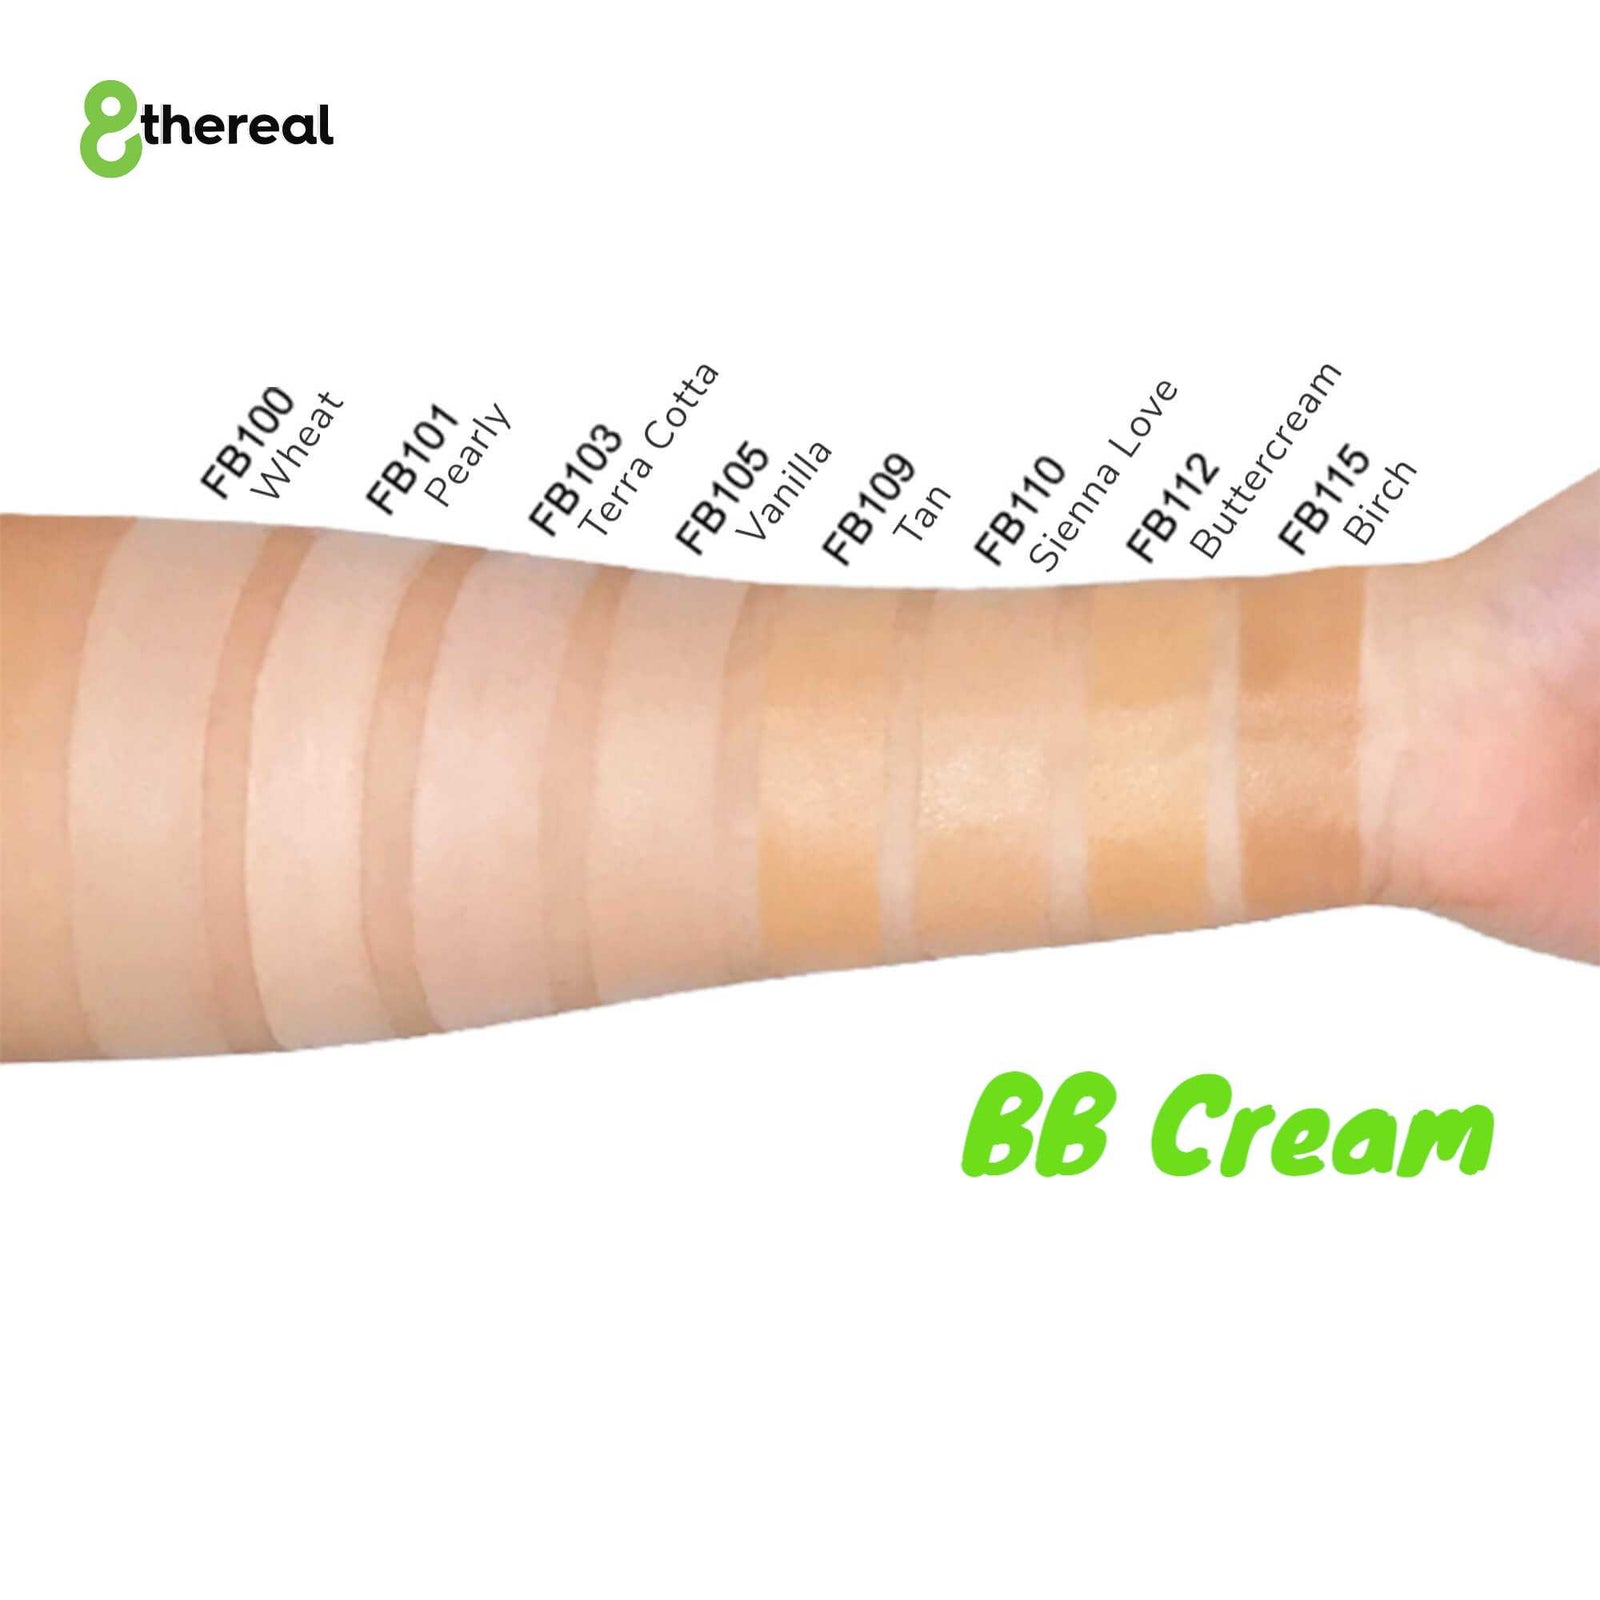 Why Is It Called BB CREAM + Best + Variants + | 8thereal BB Cream variations displayed on arm. Displays nine total shades from left to right, lightest to darkest variants as follows:Wheat FB 100; Pearly FB101; Terra Cotta FB 103; Vanilla FB105; Tan FB109; Sienna Love FB110; Buttercream FB112; Birch FB115.